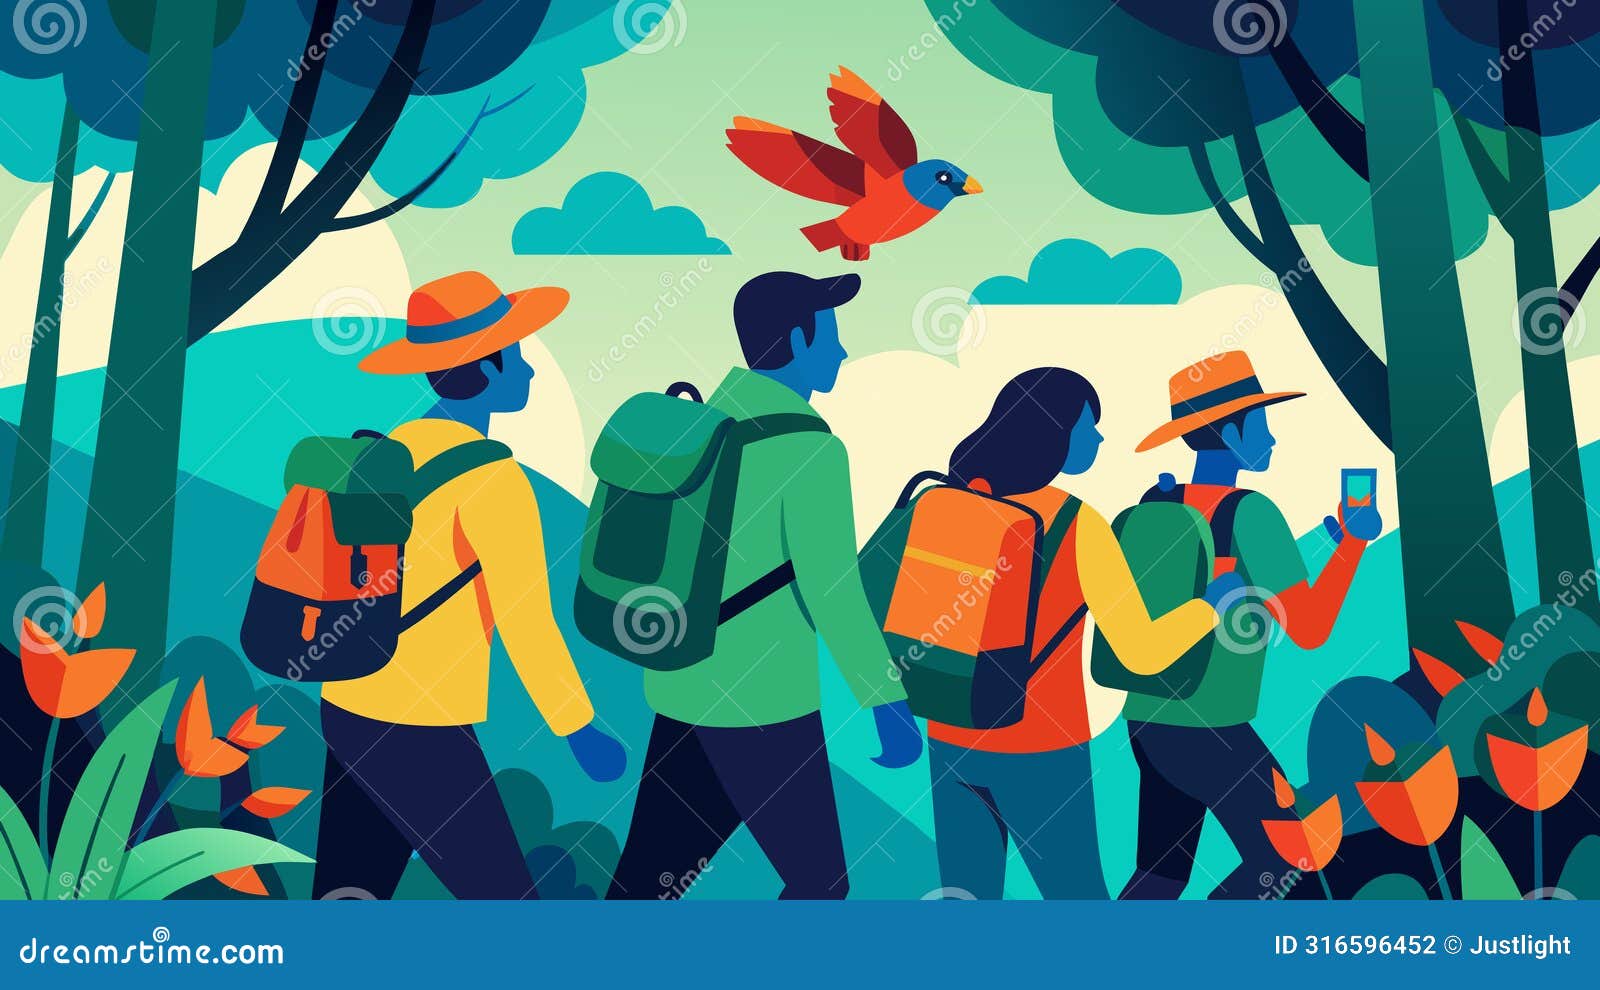 a team of birdwatchers trekking through a forest their backpacks filled with gear as they search for elusive reded